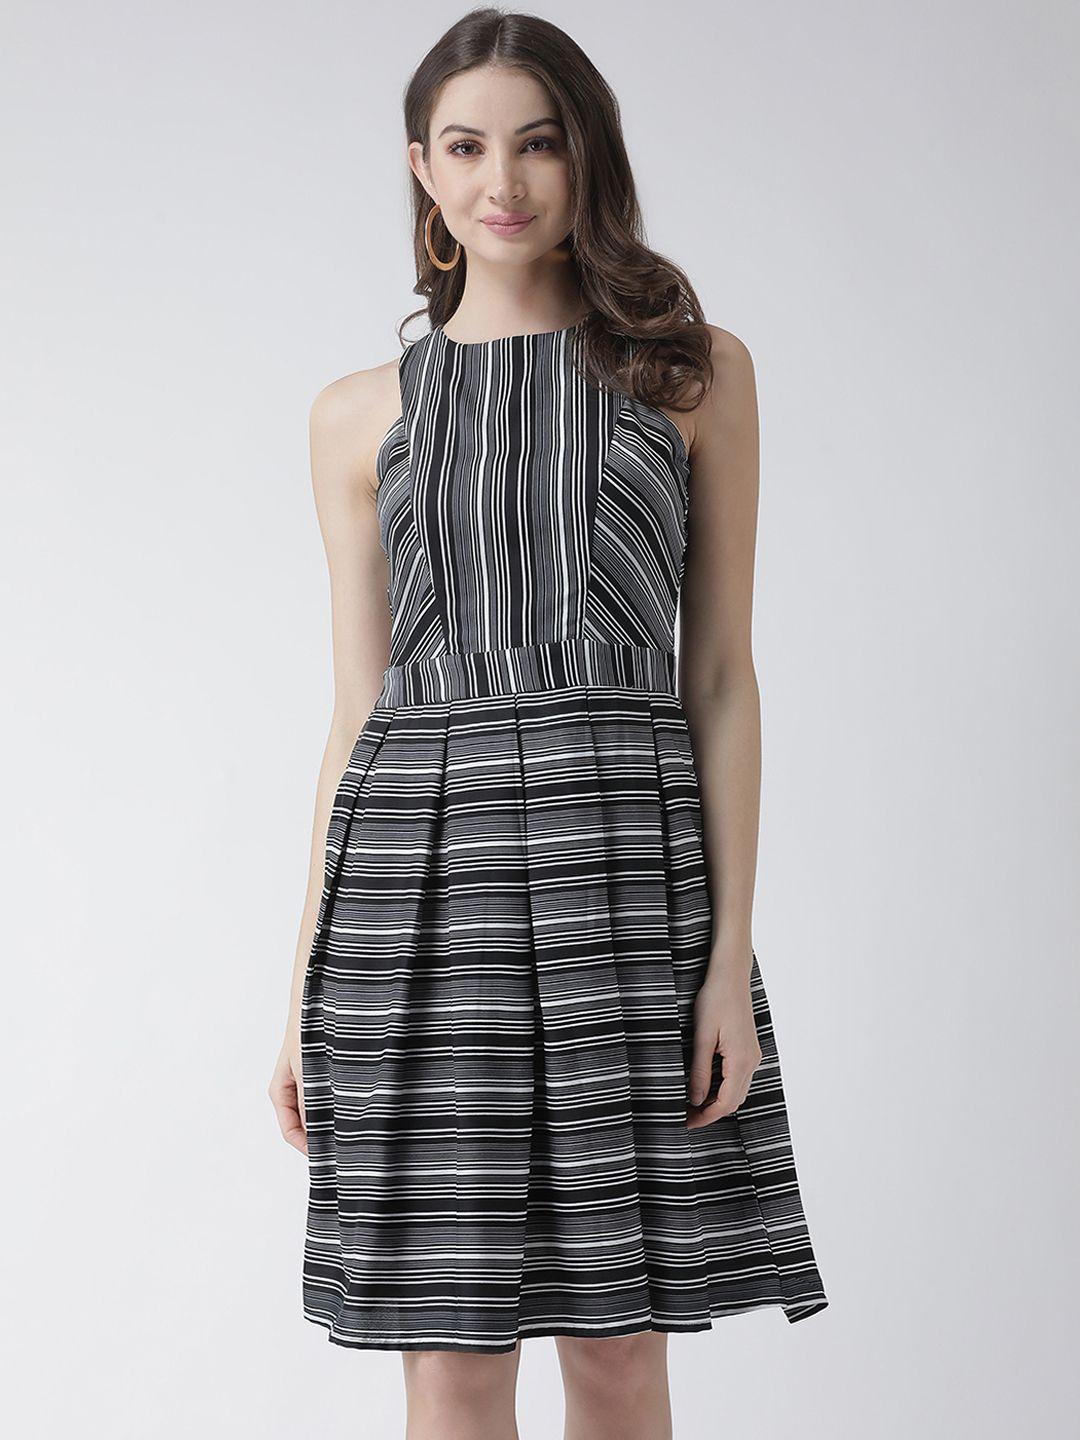 kassually women black varigated striped box pleated fit and flare dress